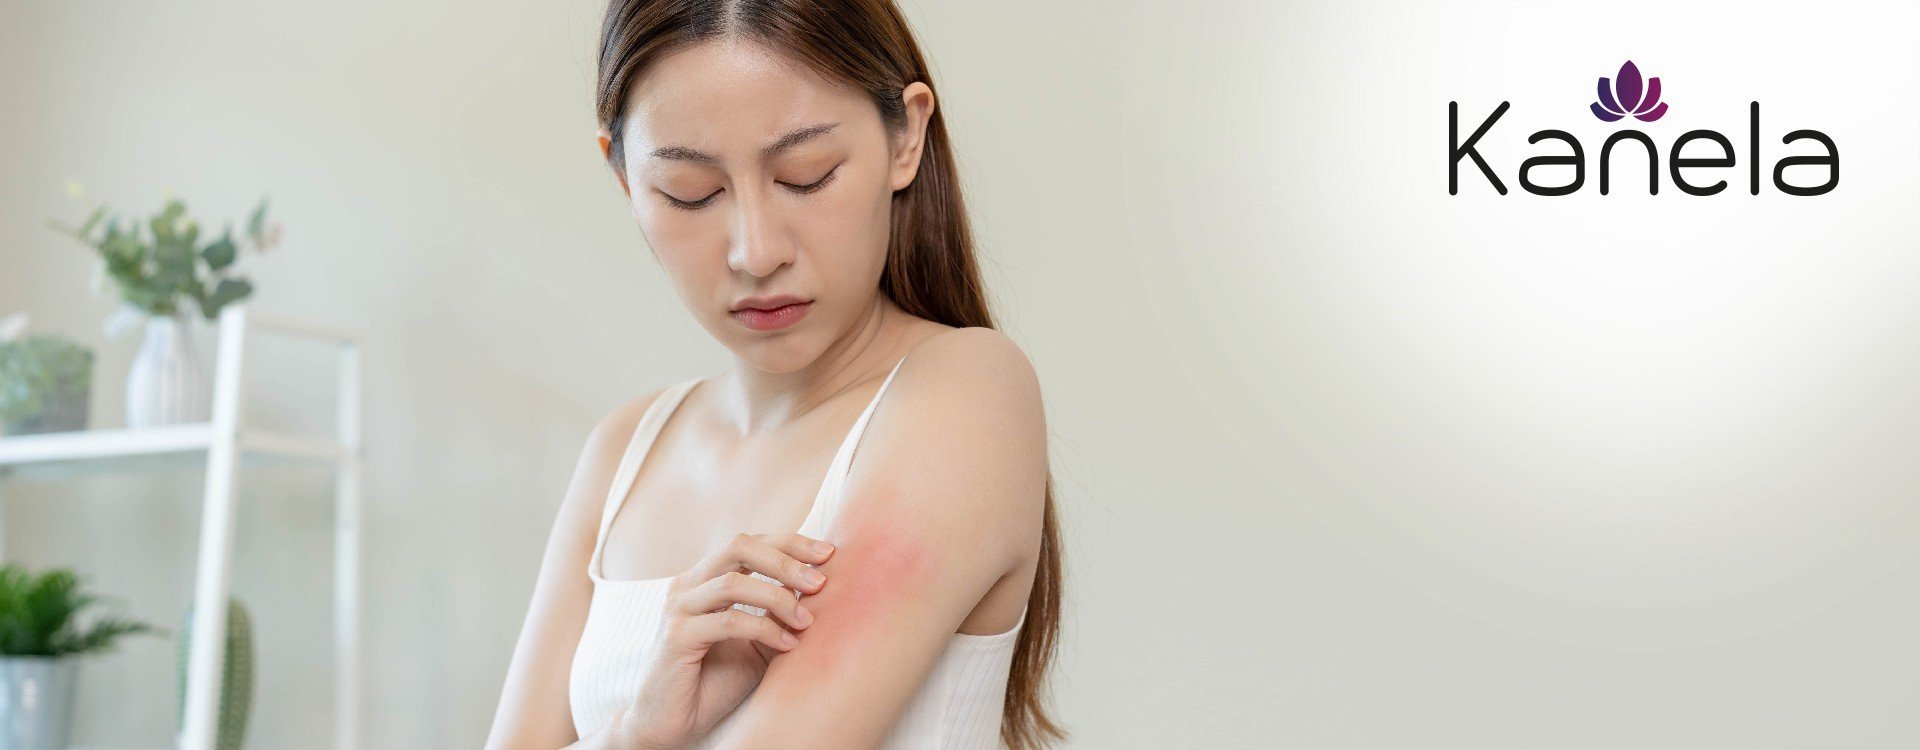 Is hay fever rash a normal reaction?